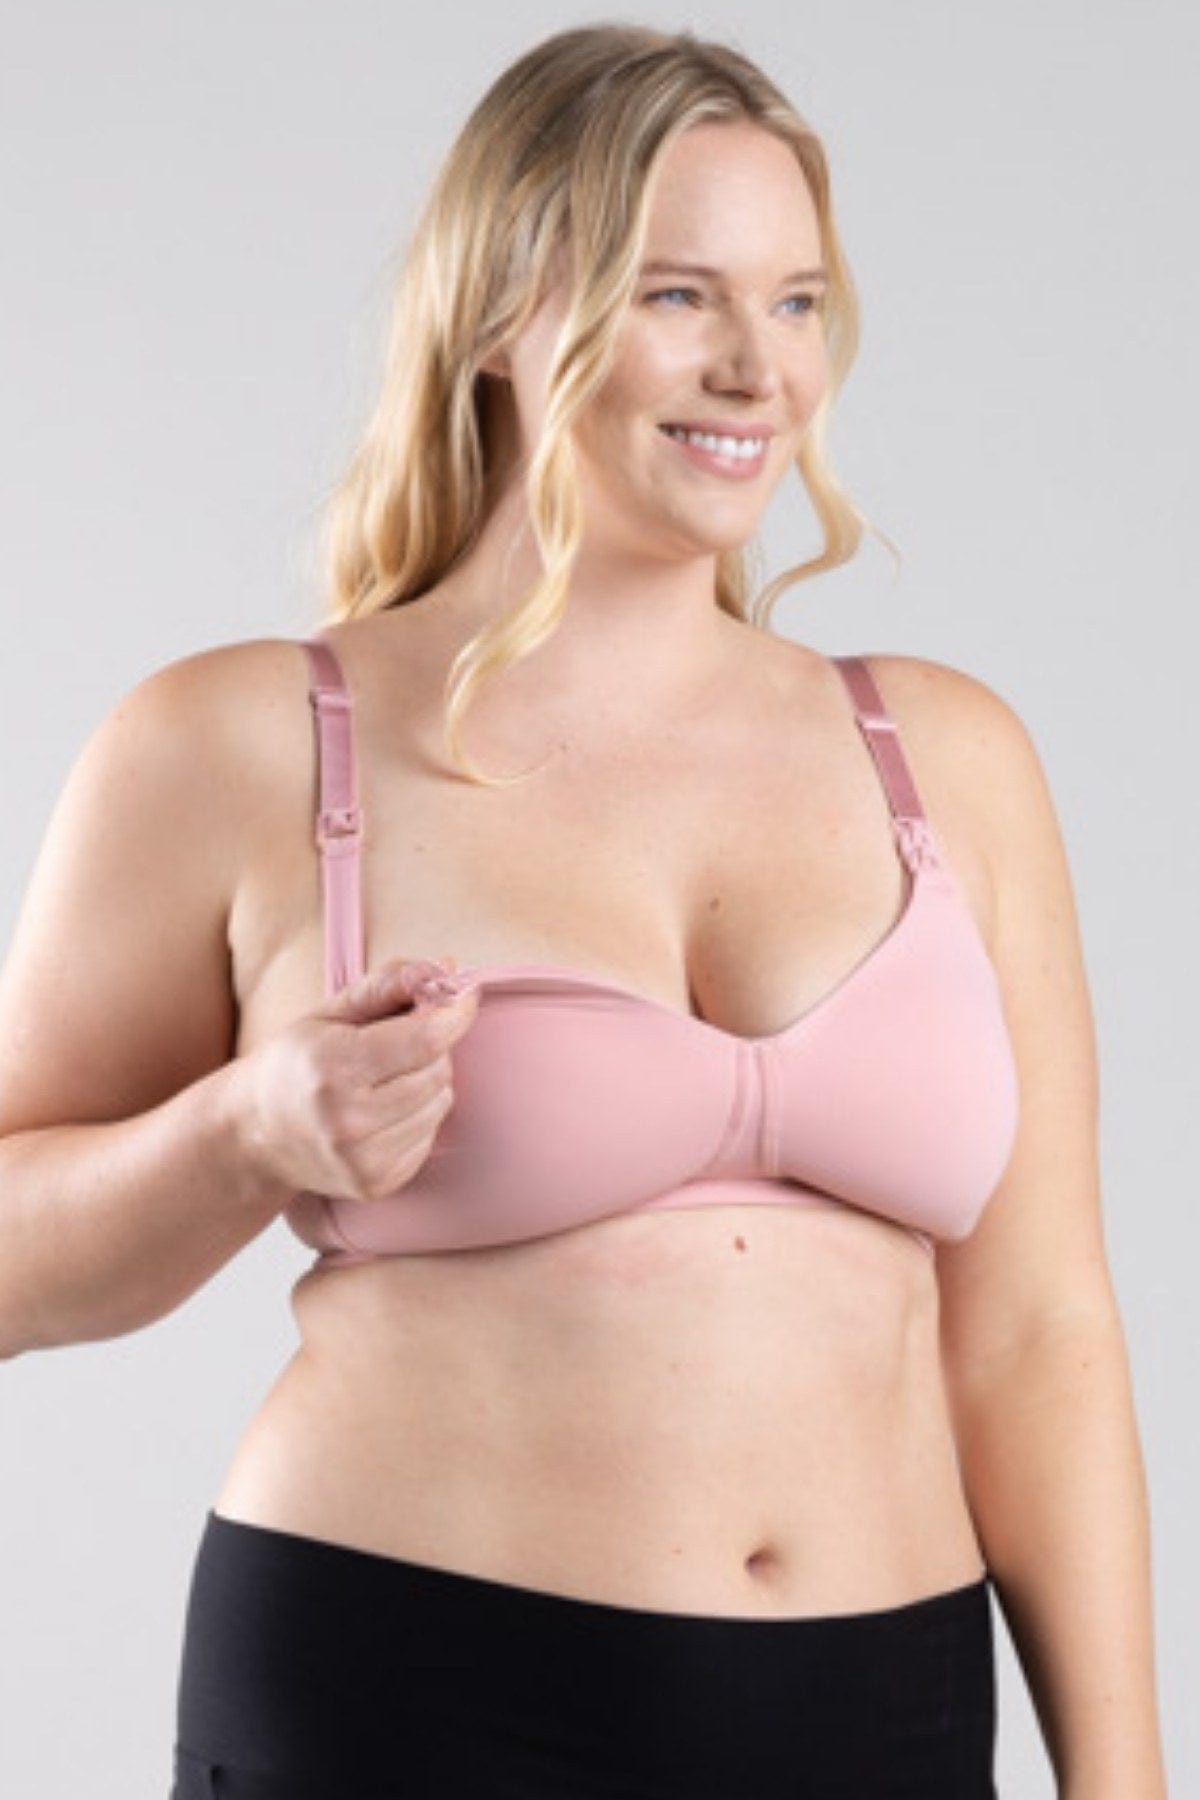 Simple Wishes® SuperMom All-in-One Bra® - New Mother New Baby Store